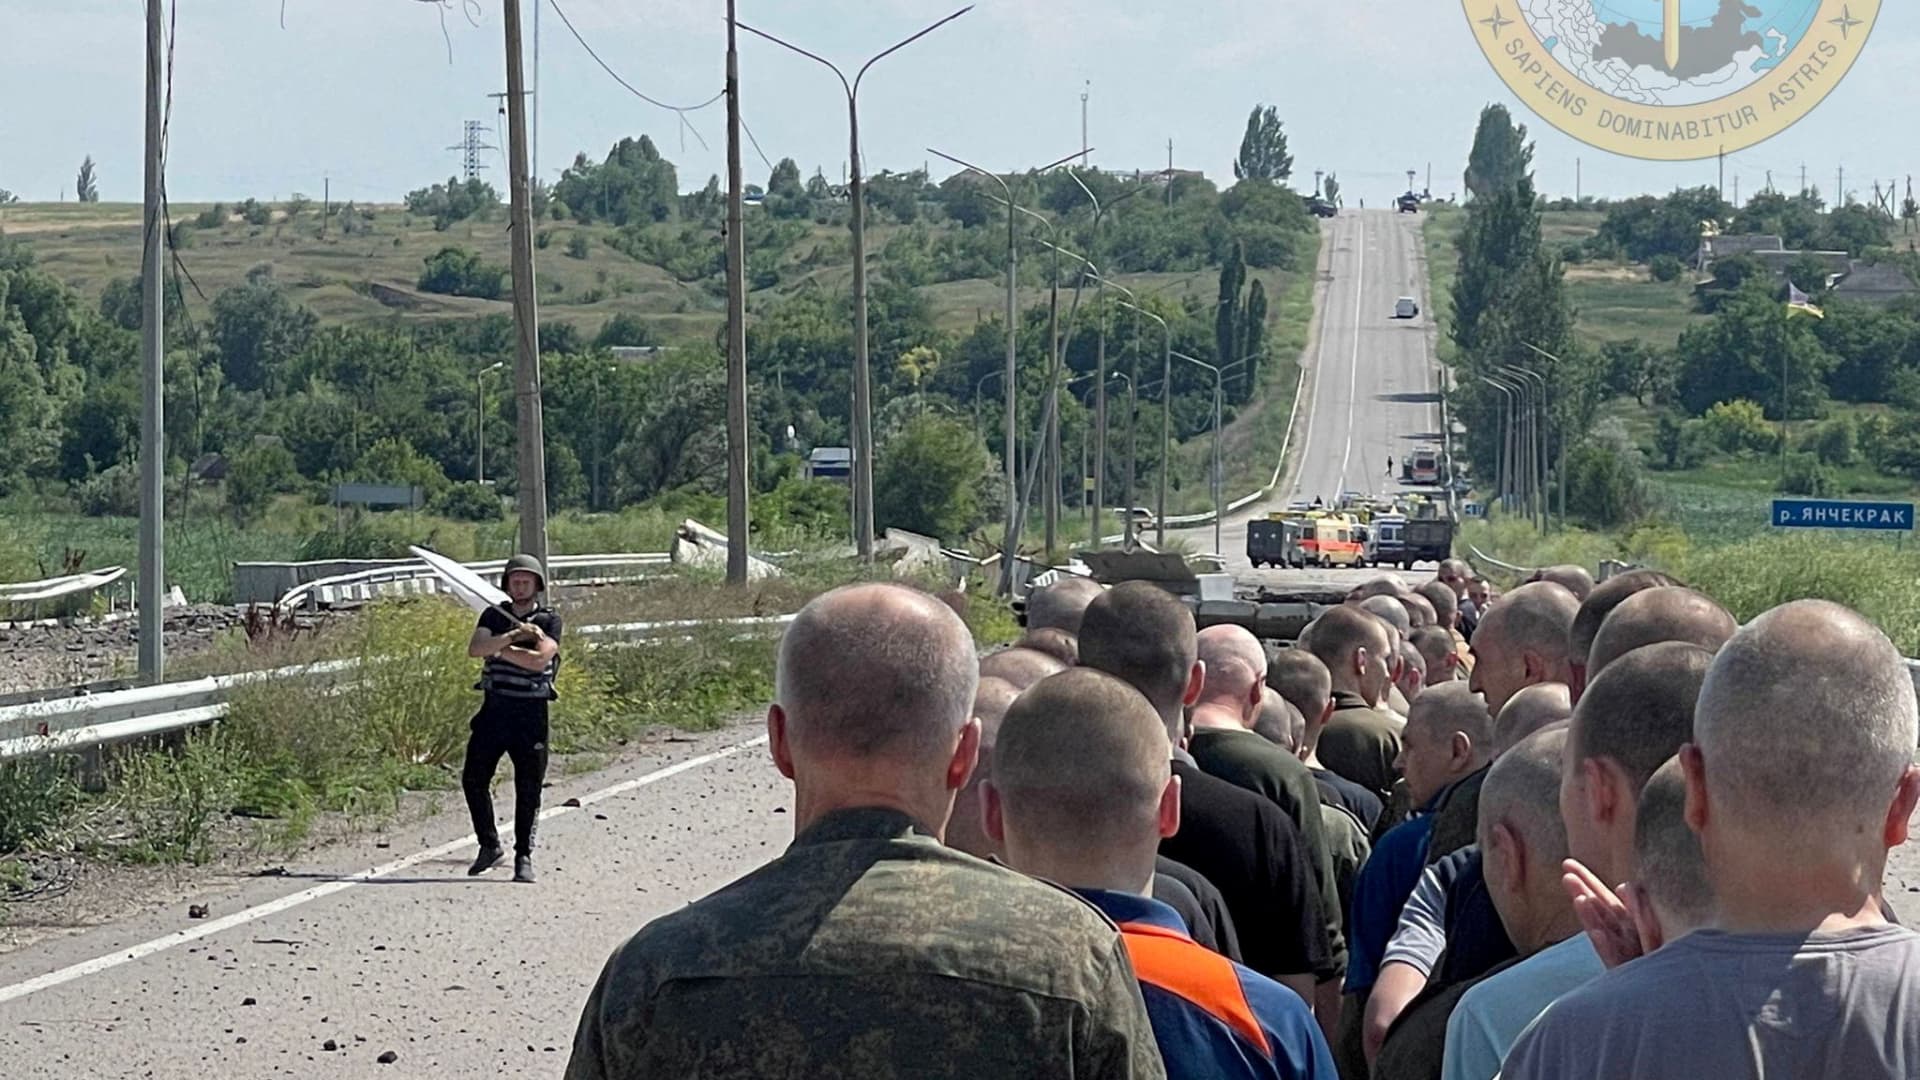 Prisoners line up alongside a road during a prisoner exchange, as Russia's attack on Ukraine continues, at a location given as Zaporizhzhia region, Ukraine, in this handout photo released on June 29, 2022.